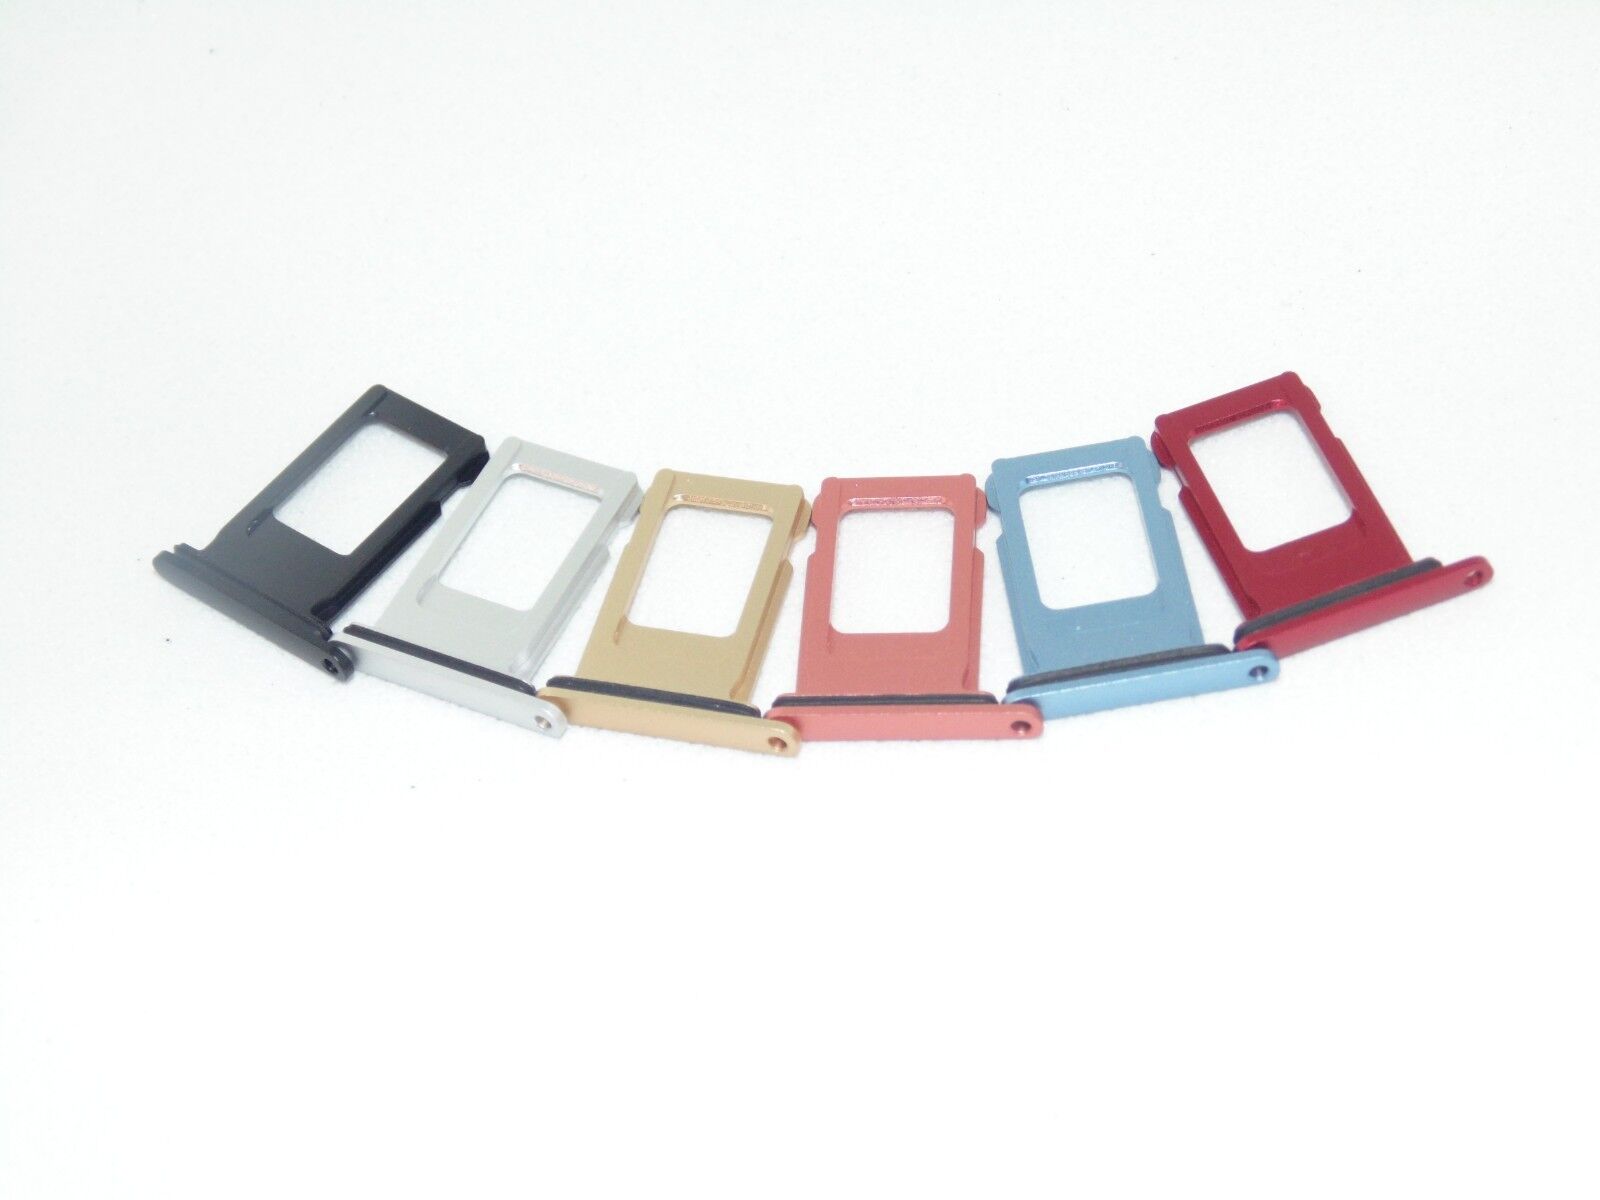 leaked-image-of-sim-trays-depicts-five-color-options-for-the-6-1-inch-lcd-iphone